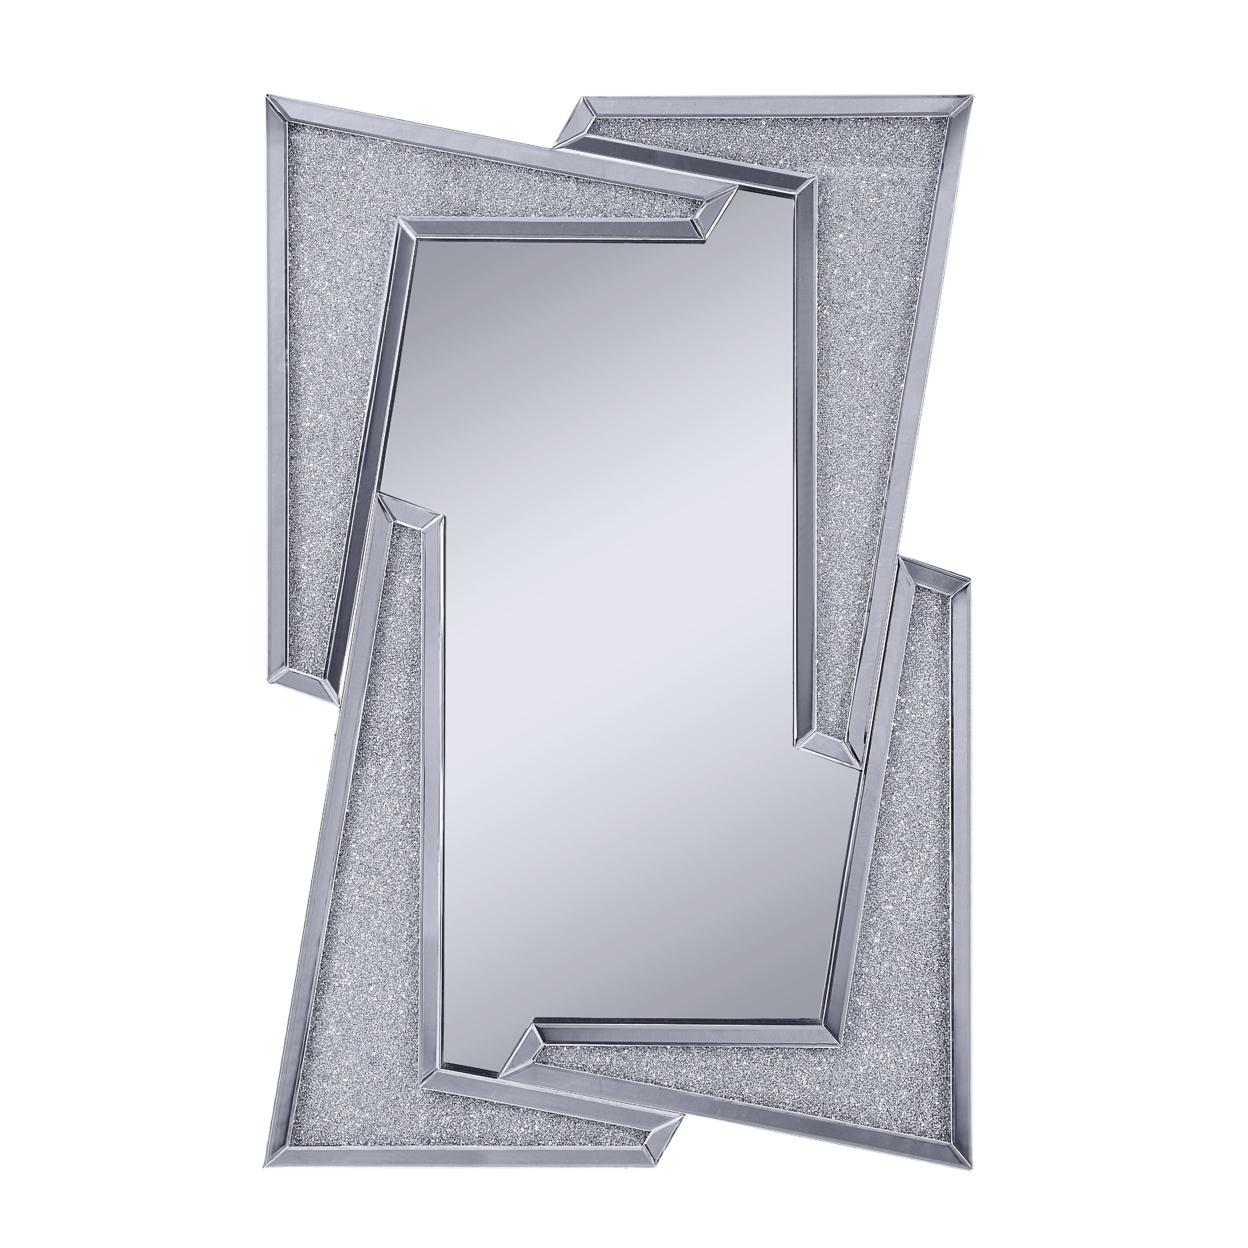 Mirrored Wooden Frame Accent Wall Decor With Four L Shaped Borders, Clear- Saltoro Sherpi